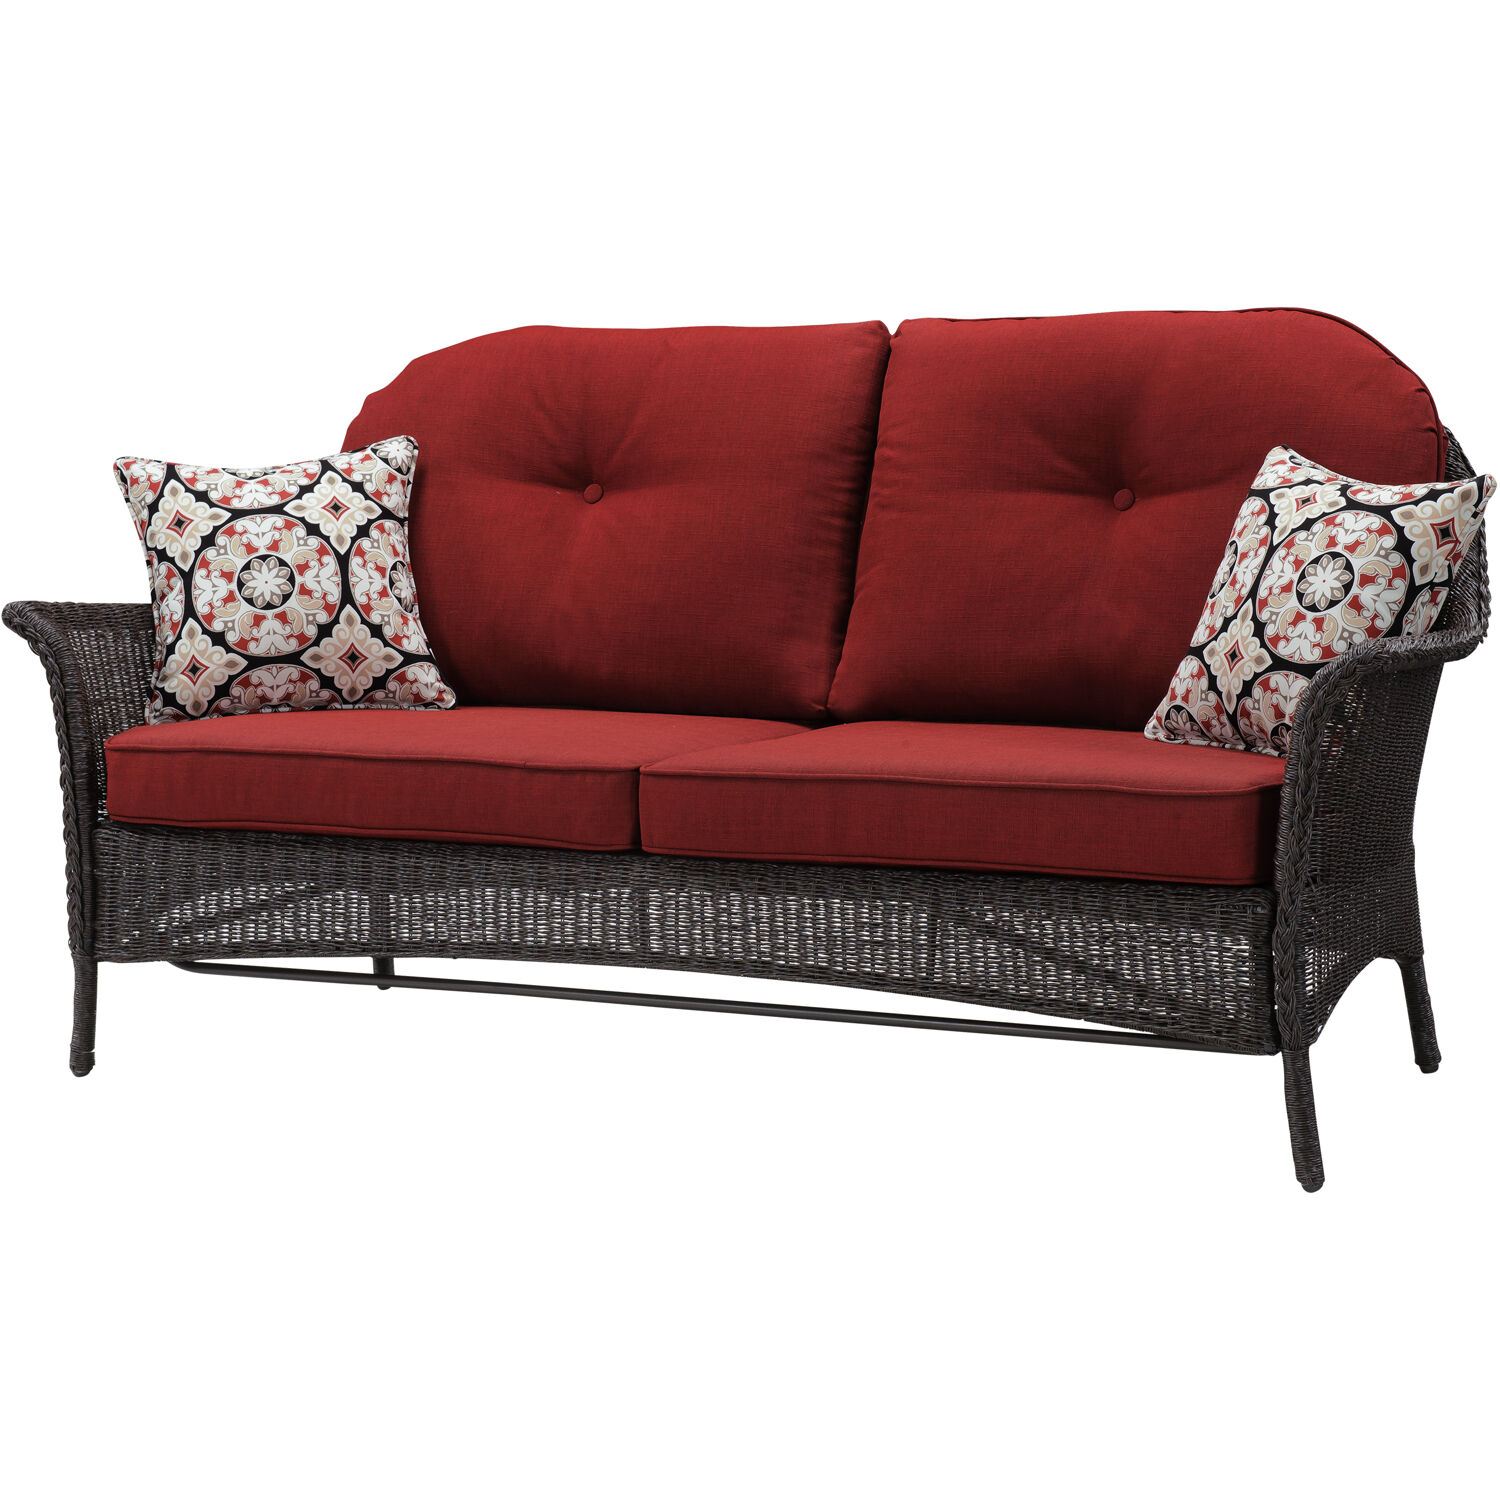 Hanover Sun Porch 6-Pc. Resin Lounge Set w/ Handwoven Loveseat, 2 Armchairs, 2 Ottomans, Coffee Table and Plush Crimson Red Cushions - image 2 of 12